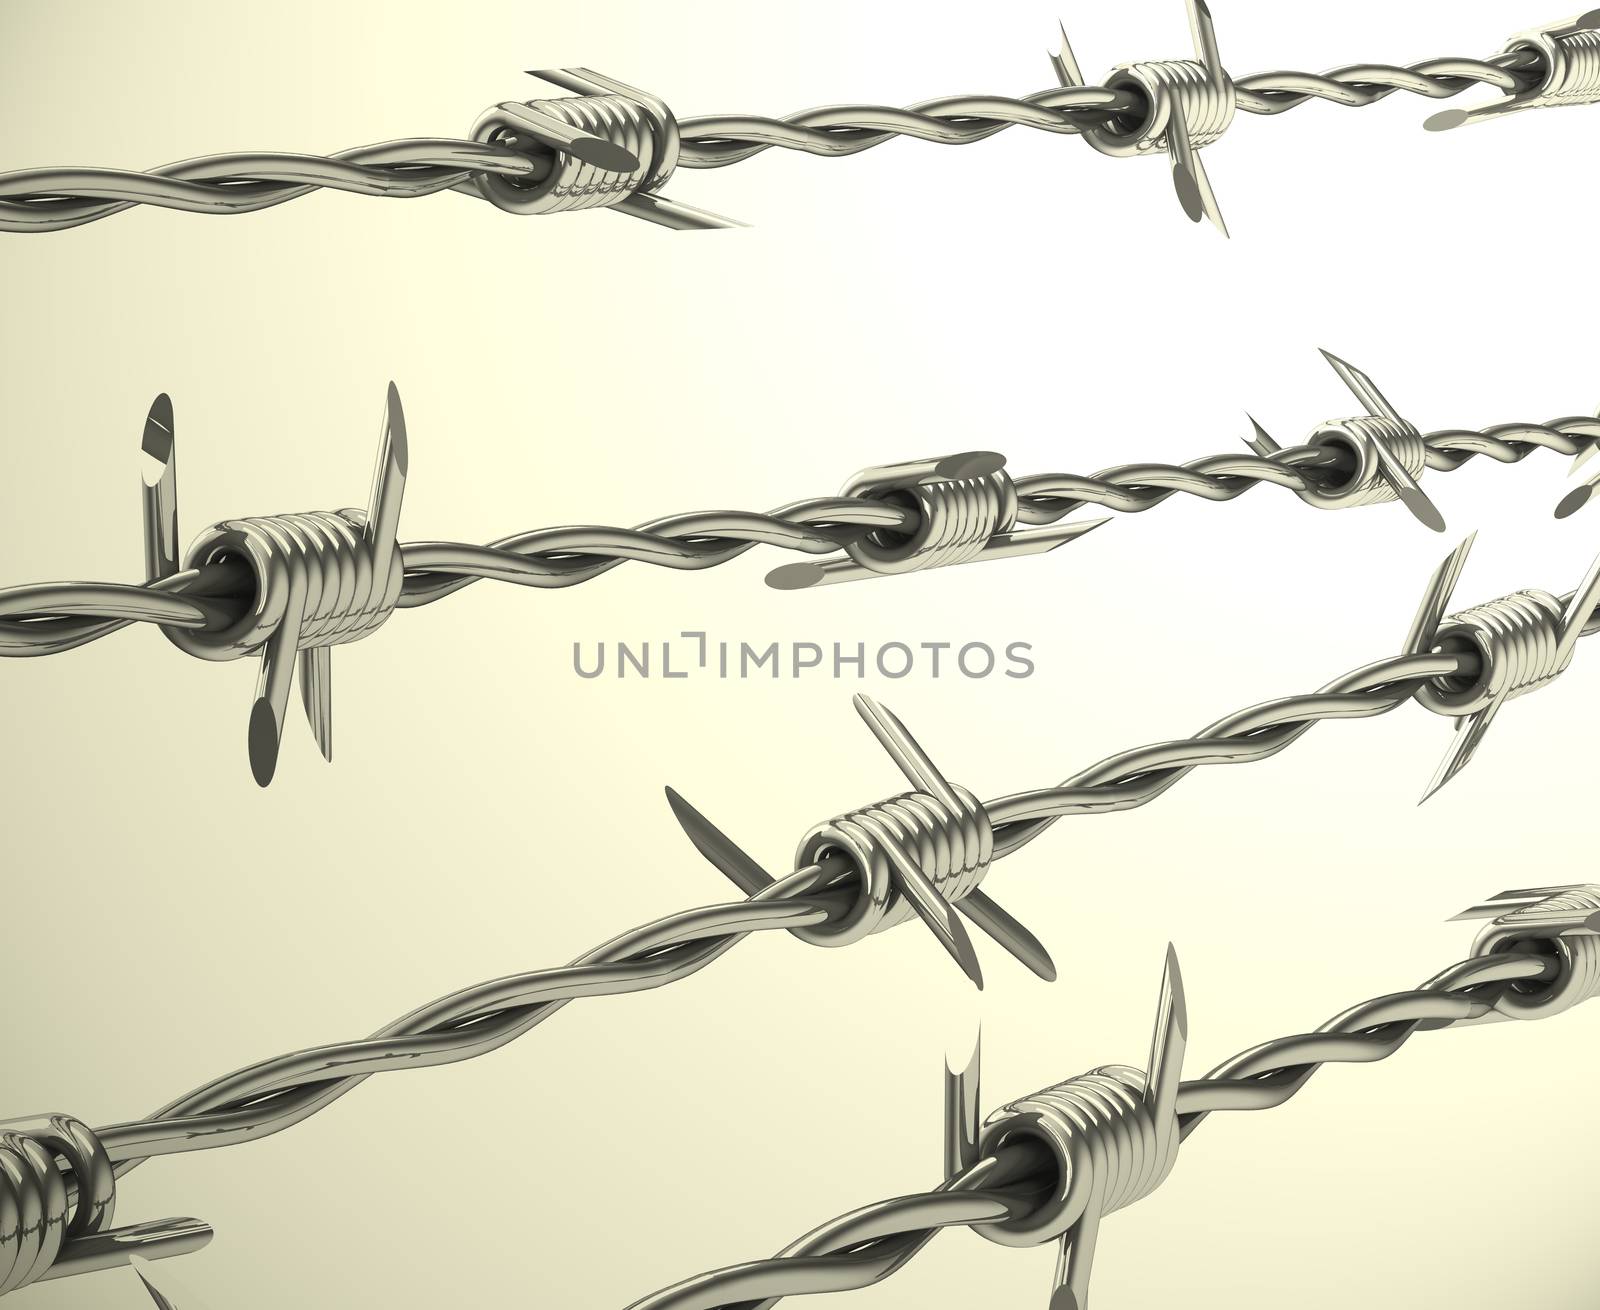 3d generated picture of a steel barbwire